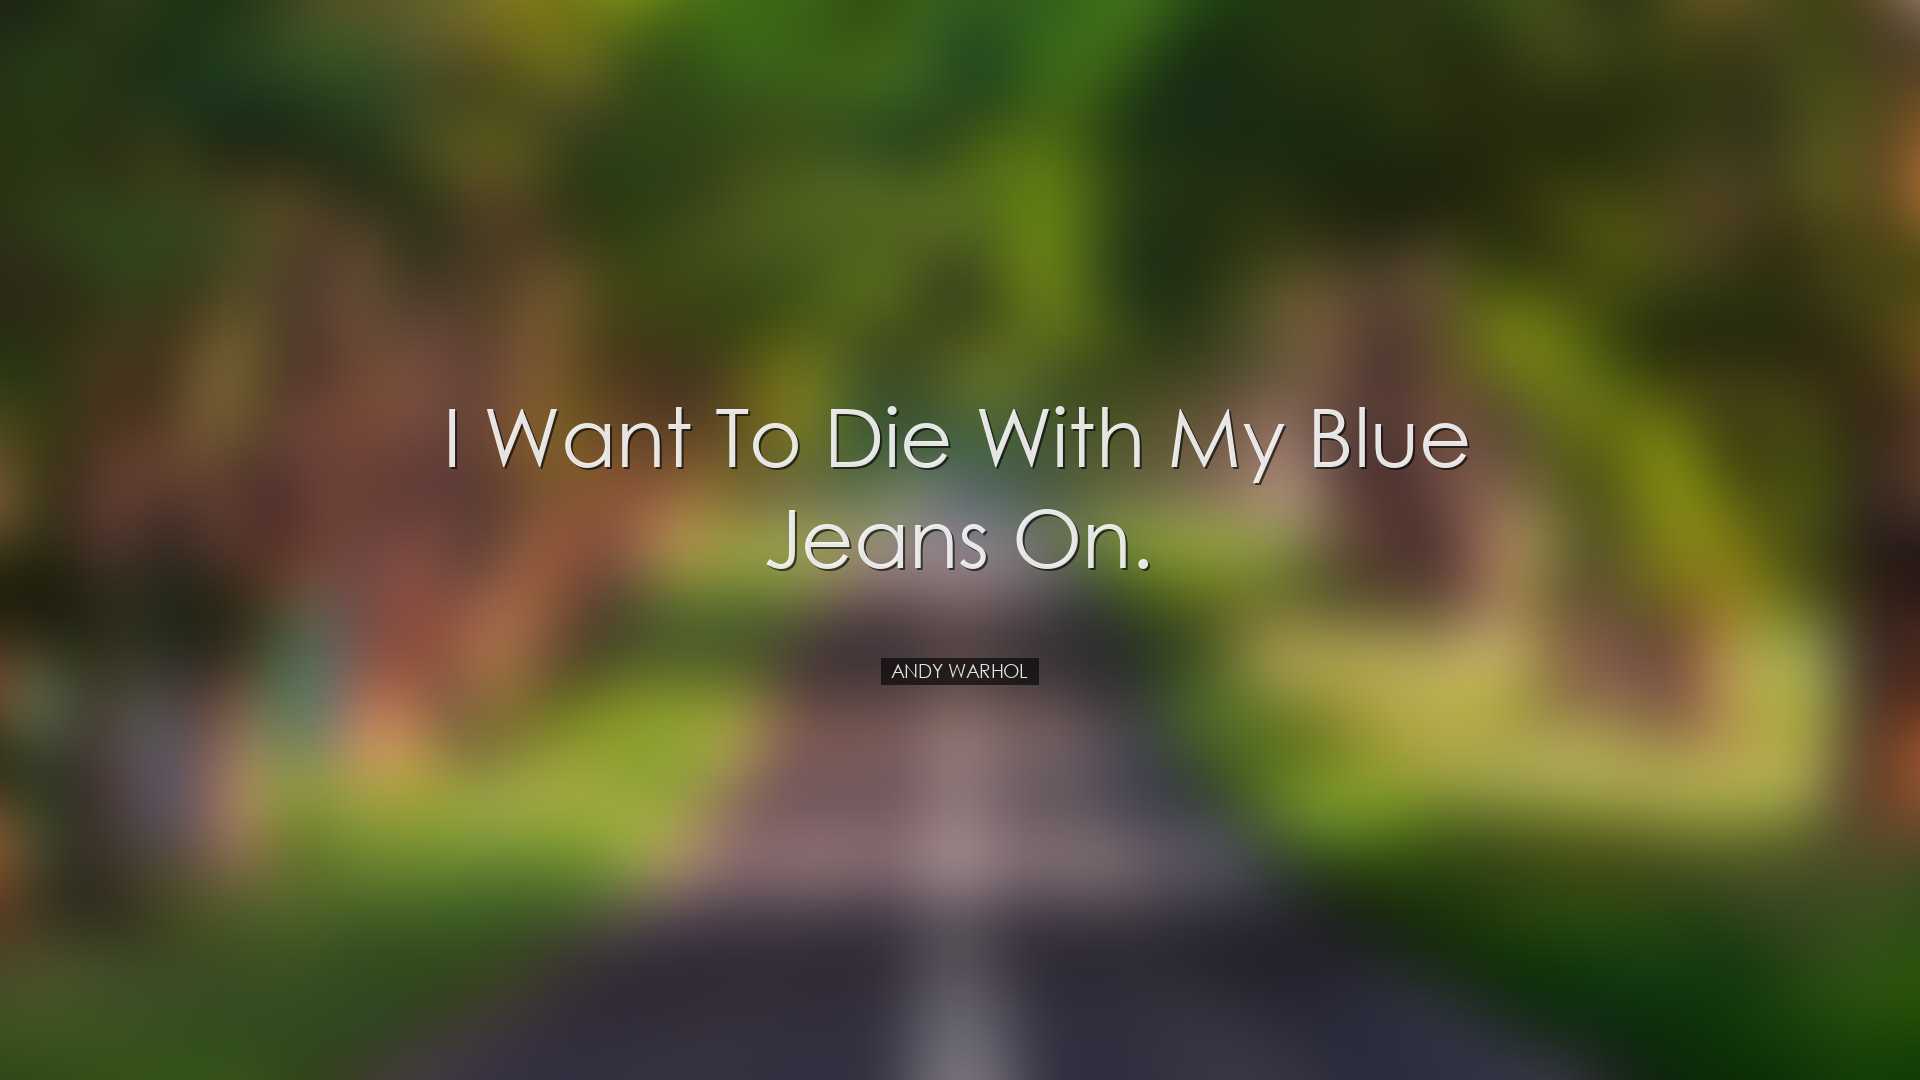 I want to die with my blue jeans on. - Andy Warhol